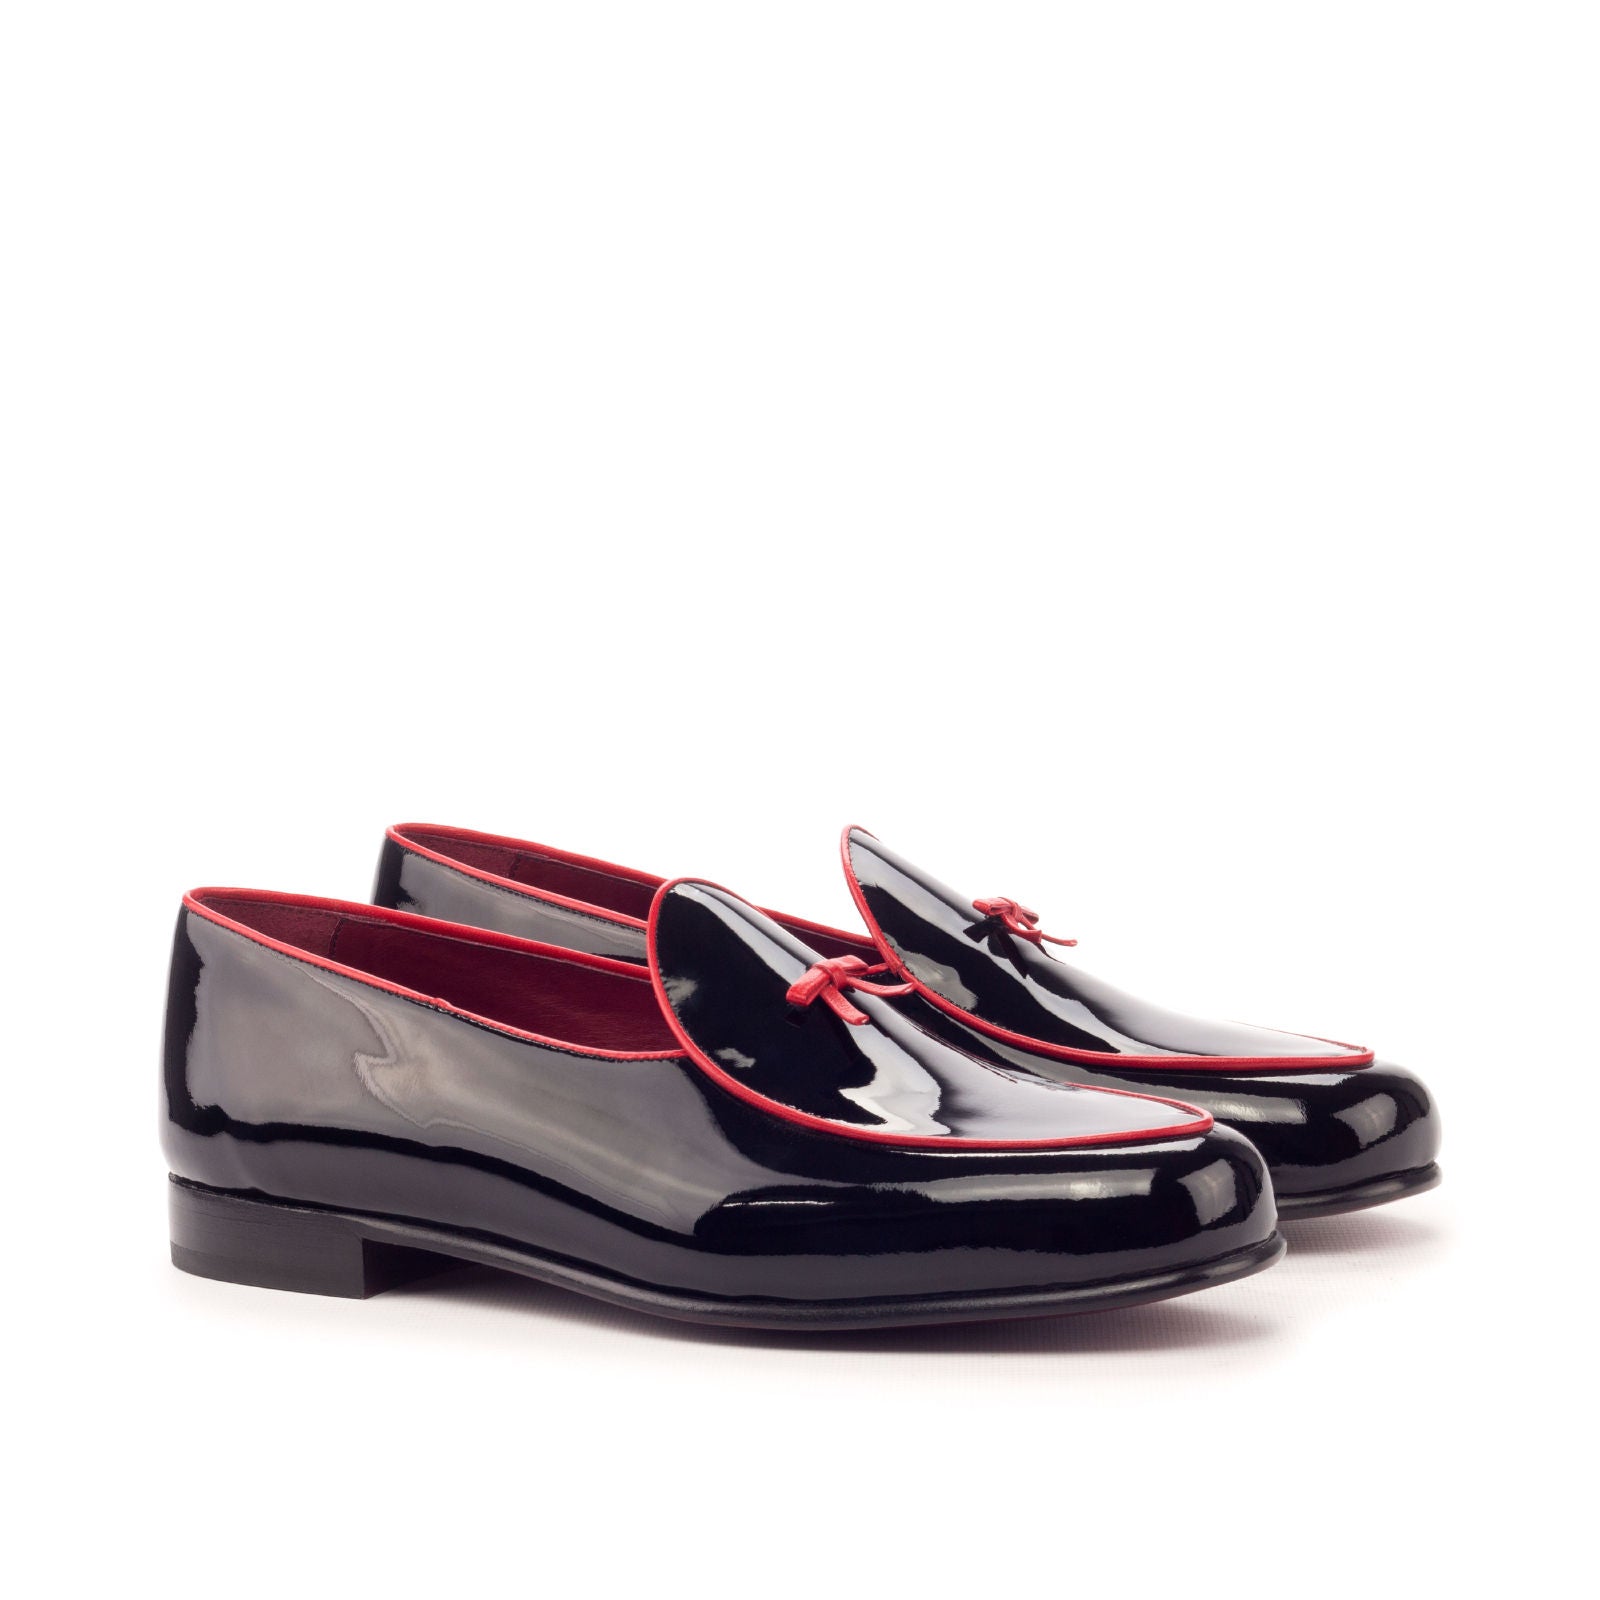 BLACK & RED PATENT LEATHER BELGIAN LOAFER